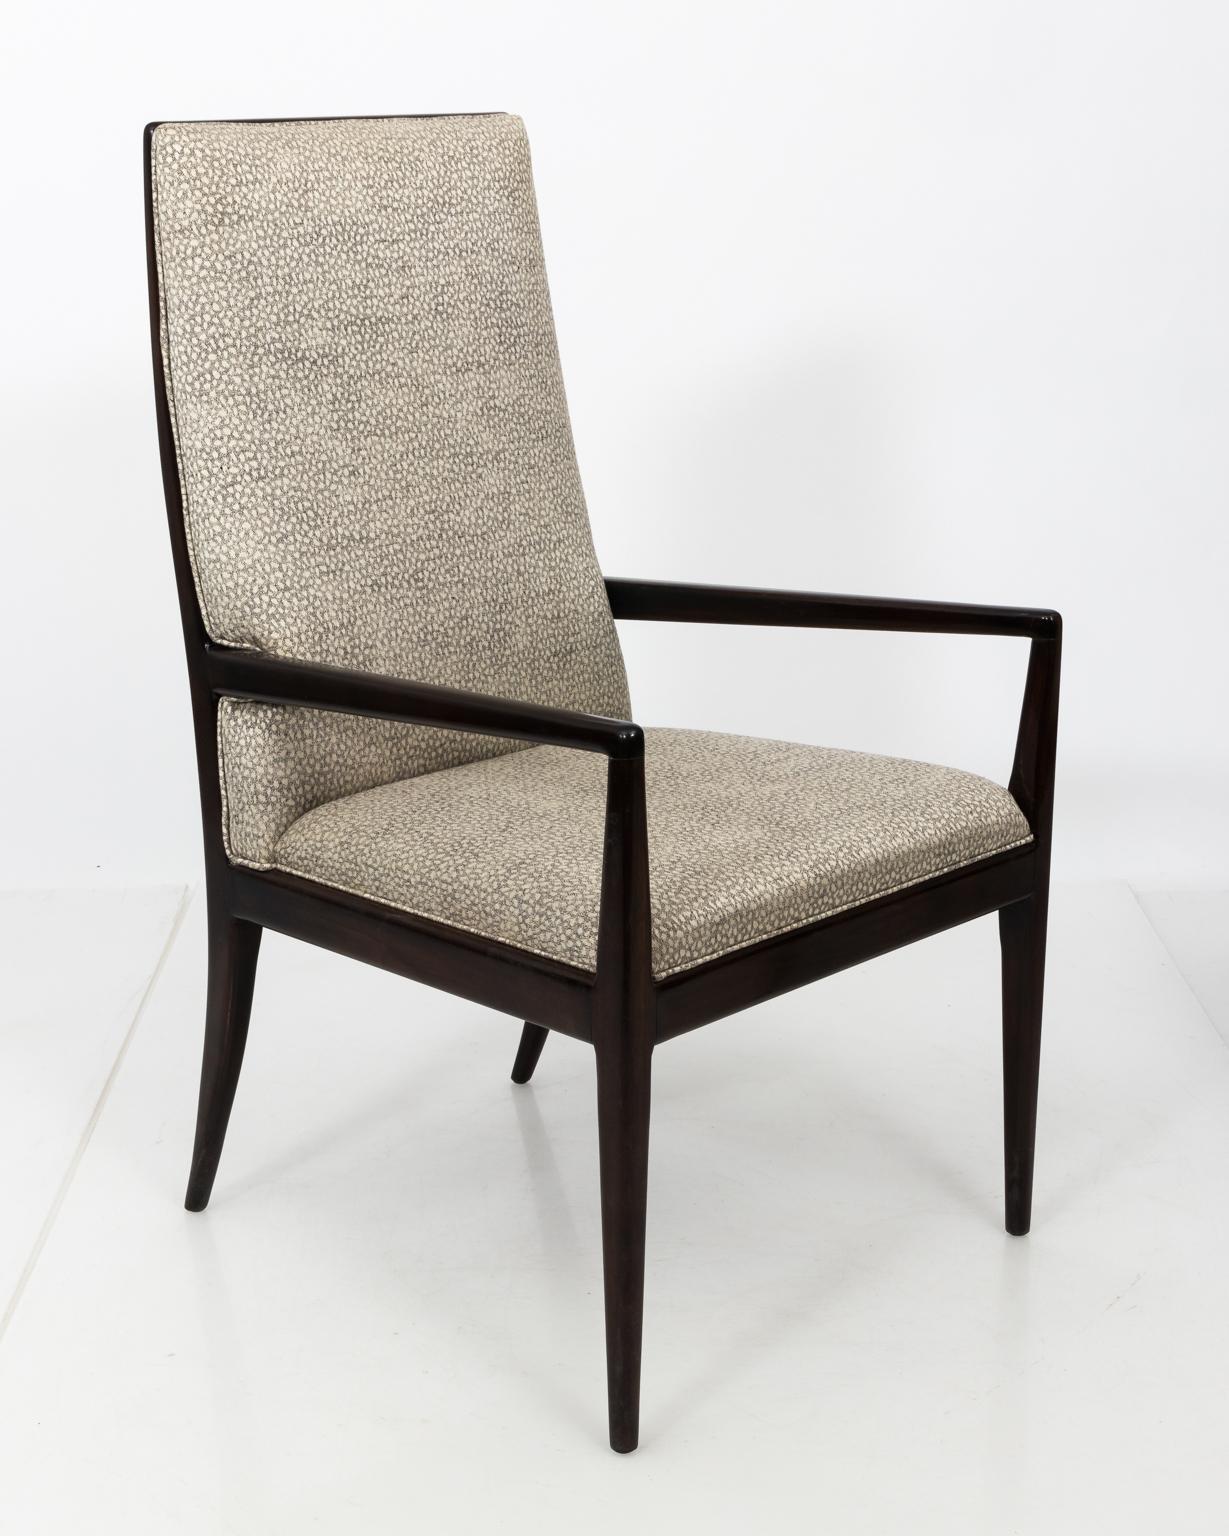 Upholstery Pair of High Back Armchairs in the Manner of T.H. Robsjohn-Gibbins